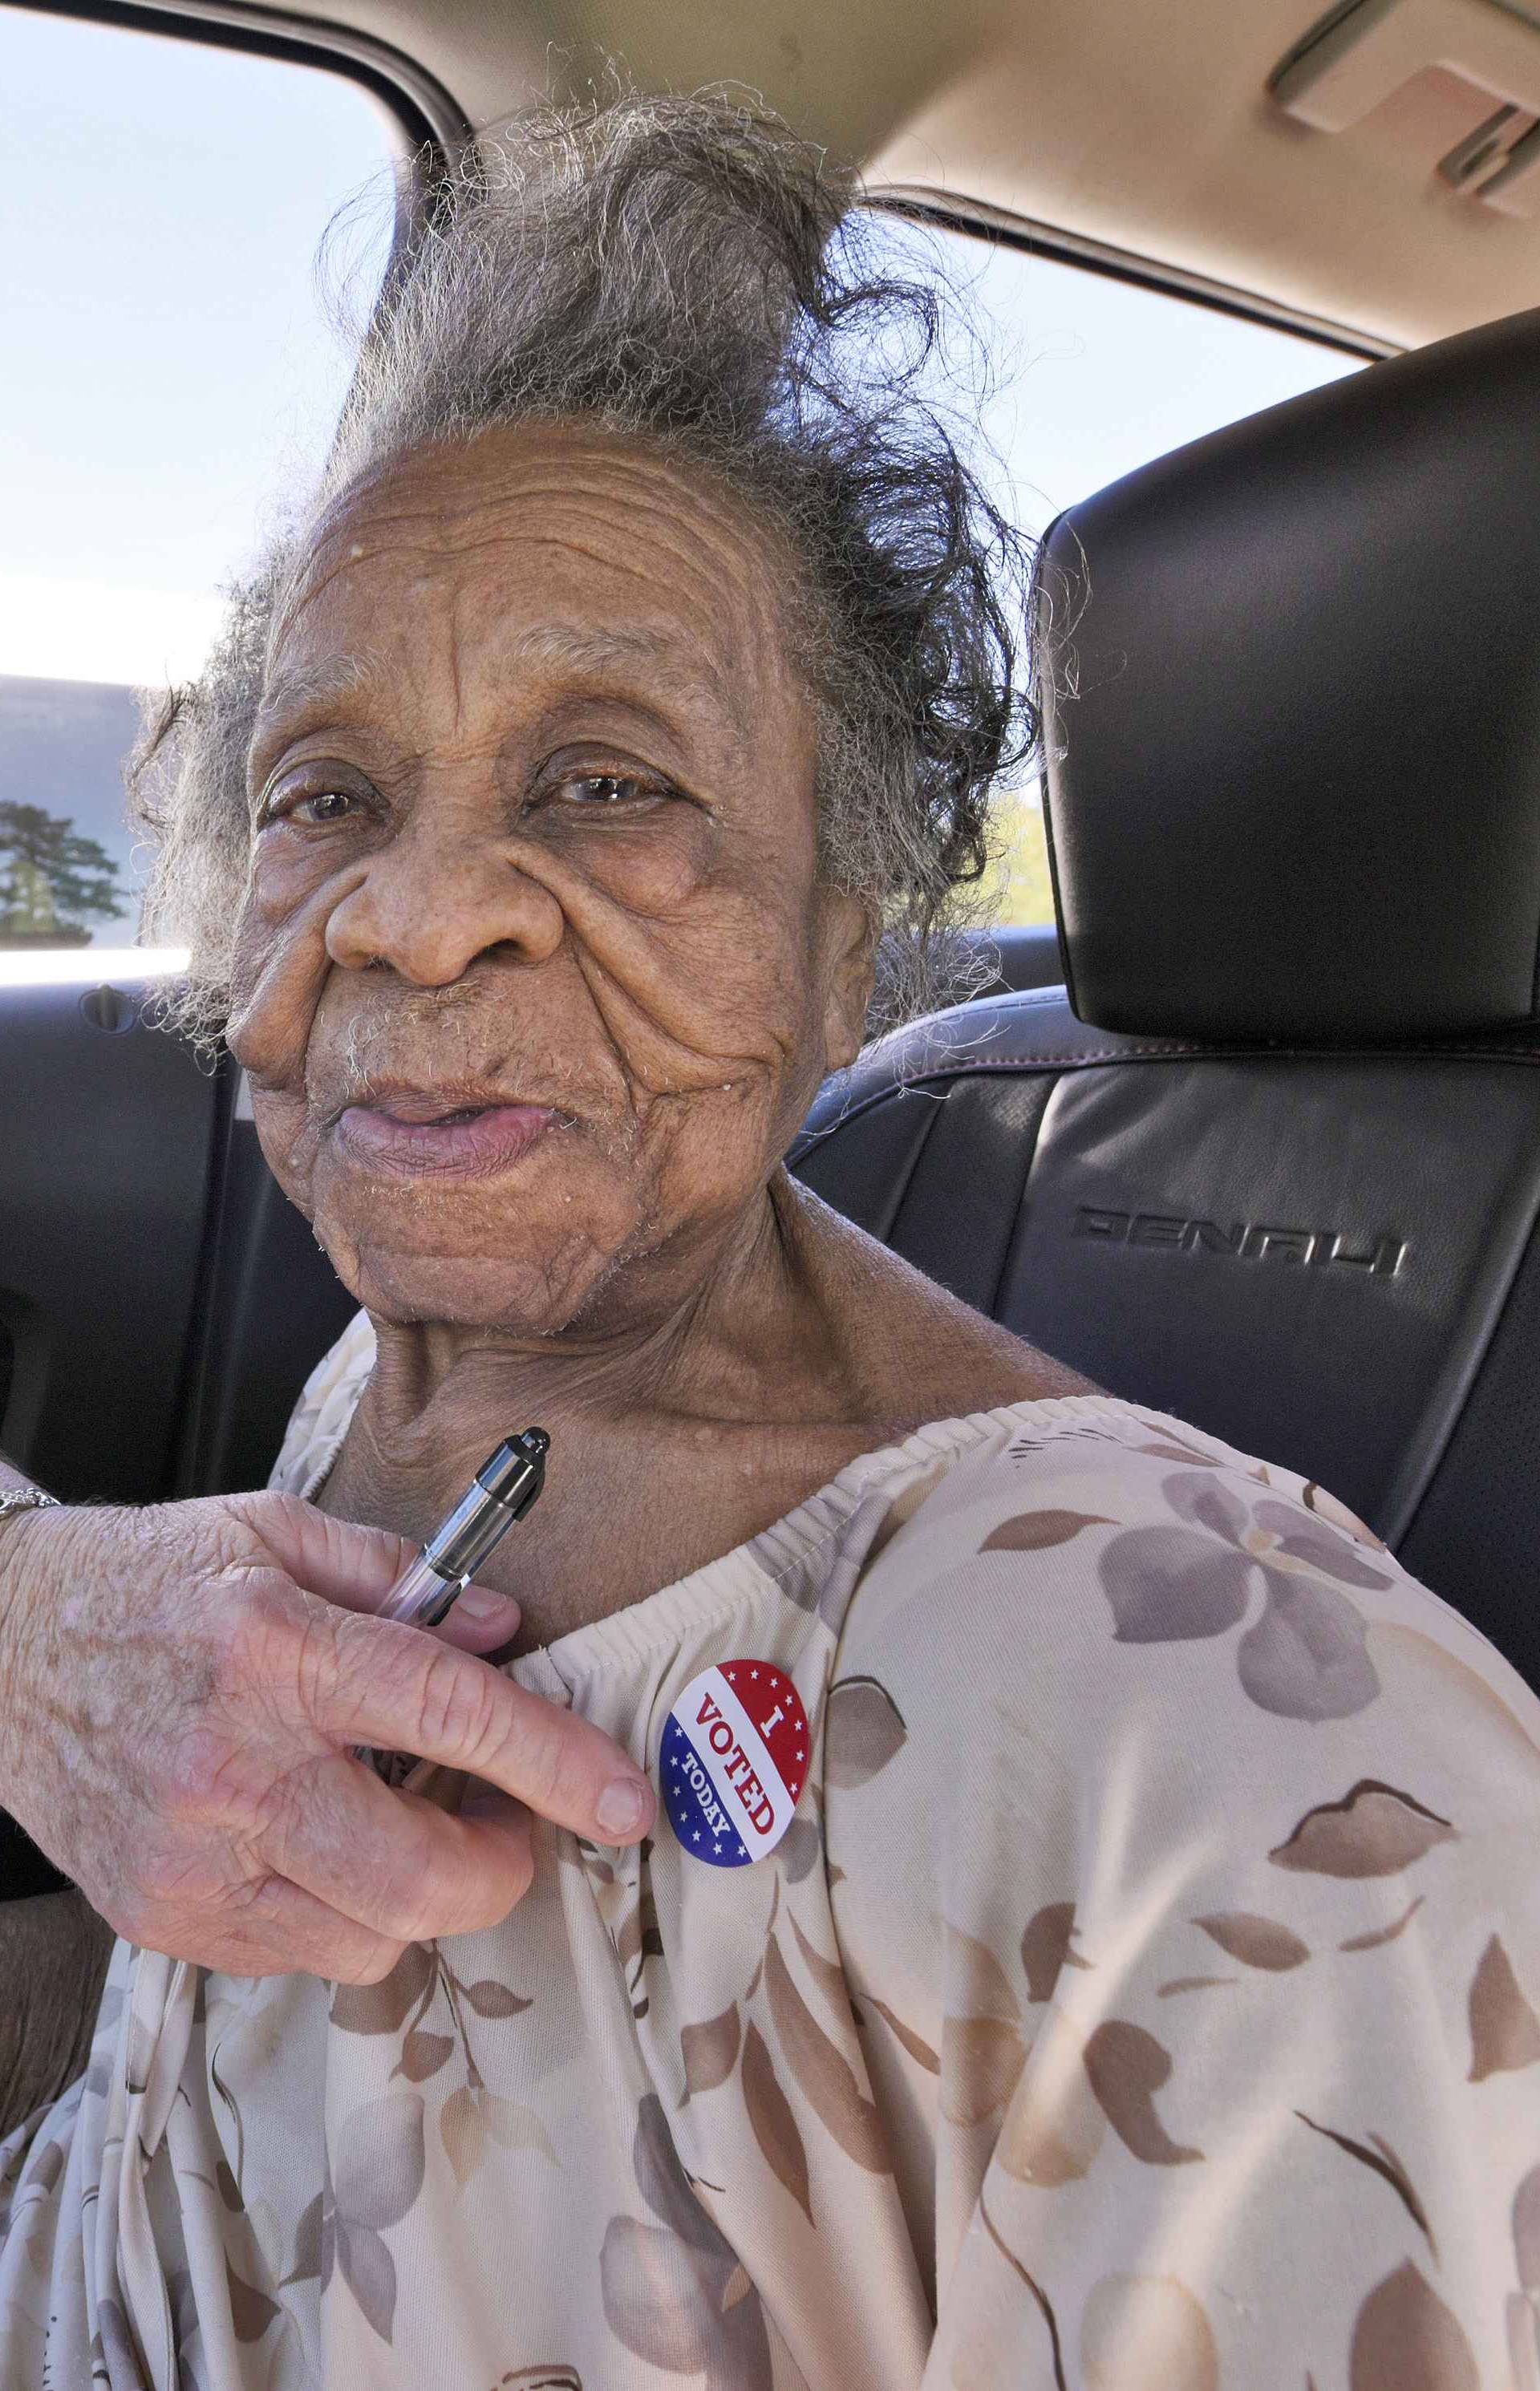 100 year old Grace Bell Hardison receives an "I Voted Today" sticker from election official Elain